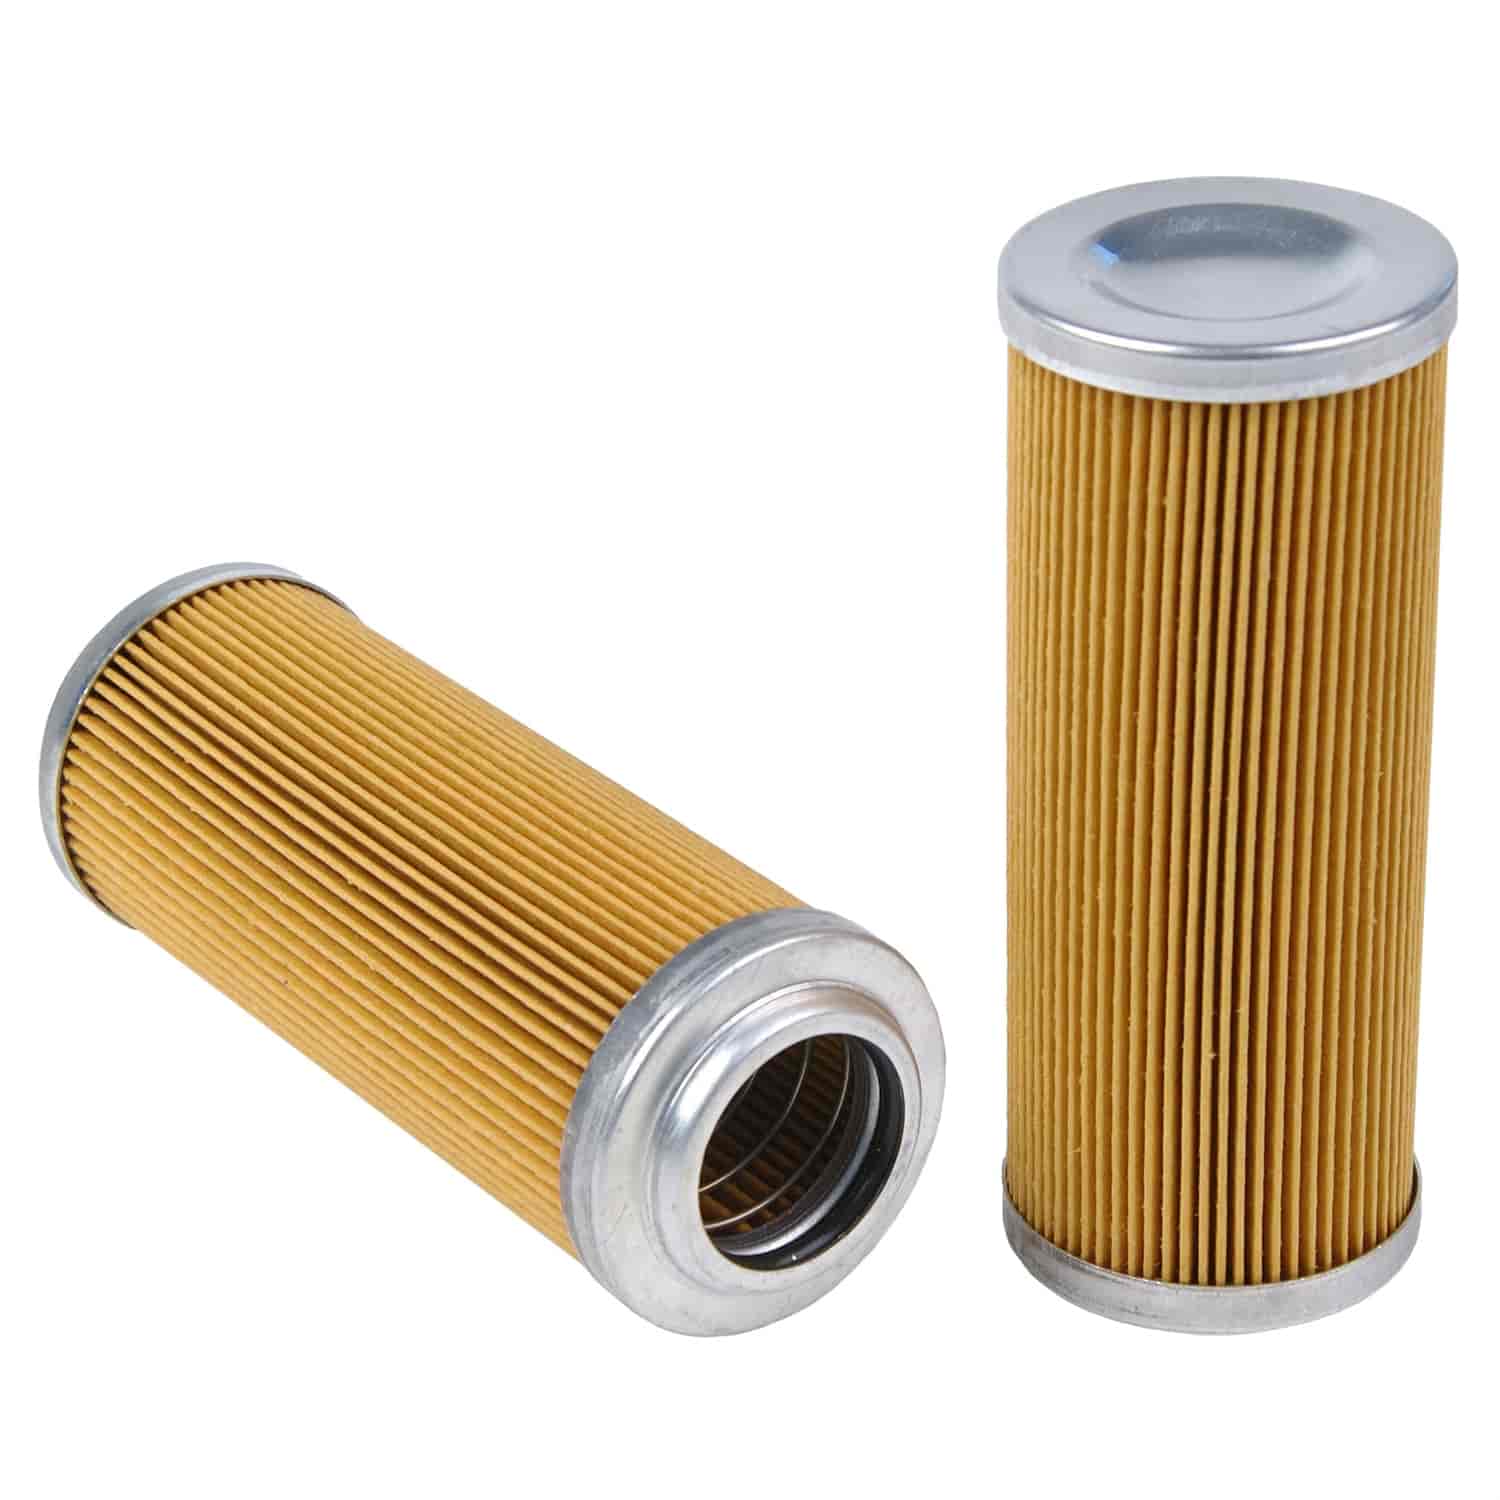 Replacement Fuel Filter Element 10 micron for part #027-12310, 12311, 12360